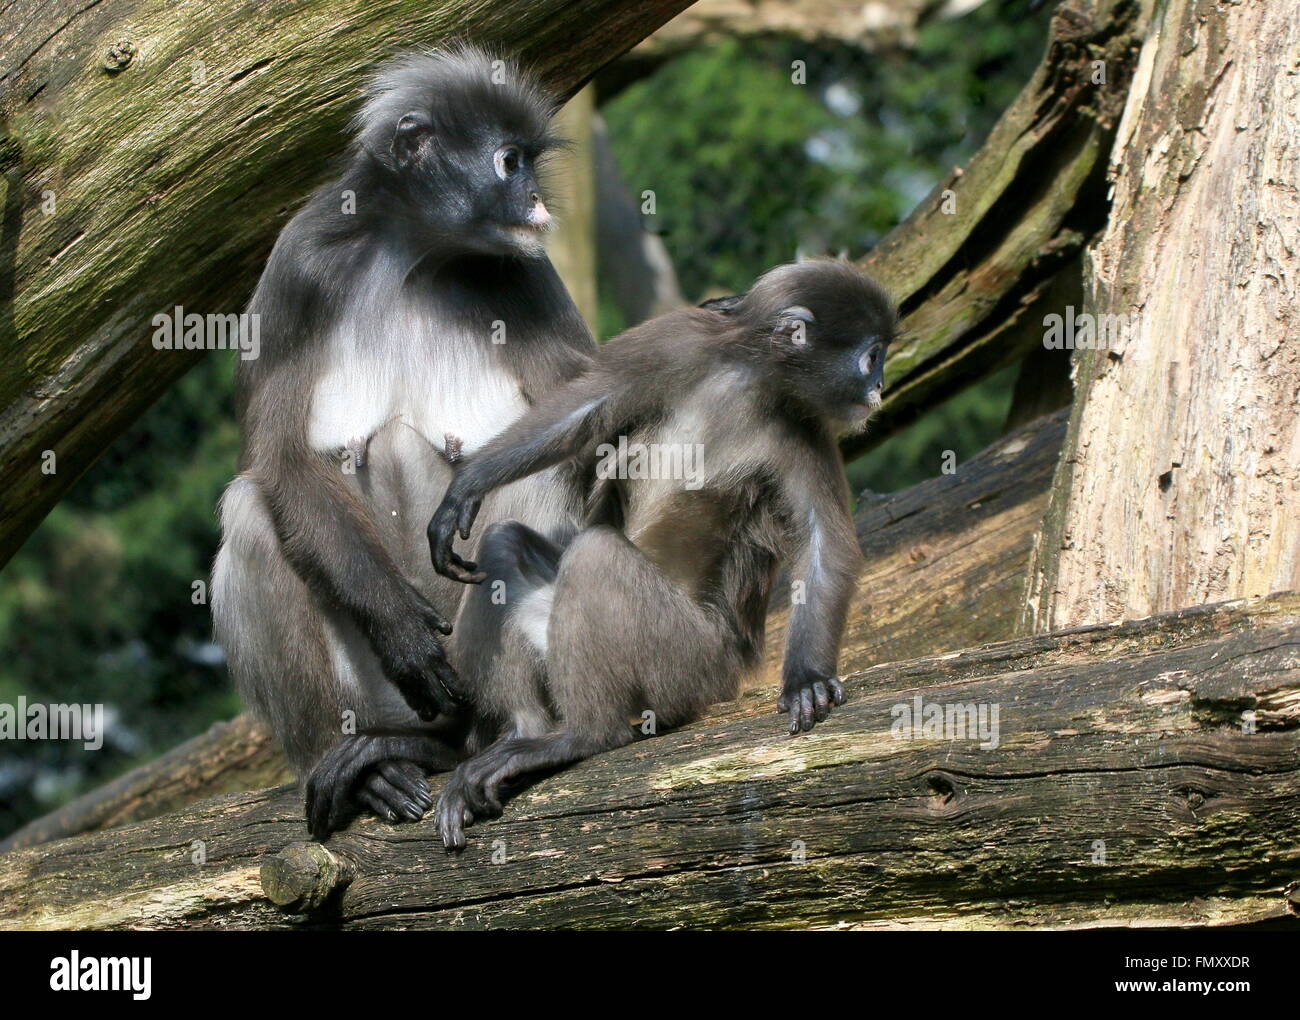 Pair of Southeast Asian Dusky leaf monkeys (Trachypithecus obscurus), mother and son. A.k.a Spectacled langurs. Stock Photo